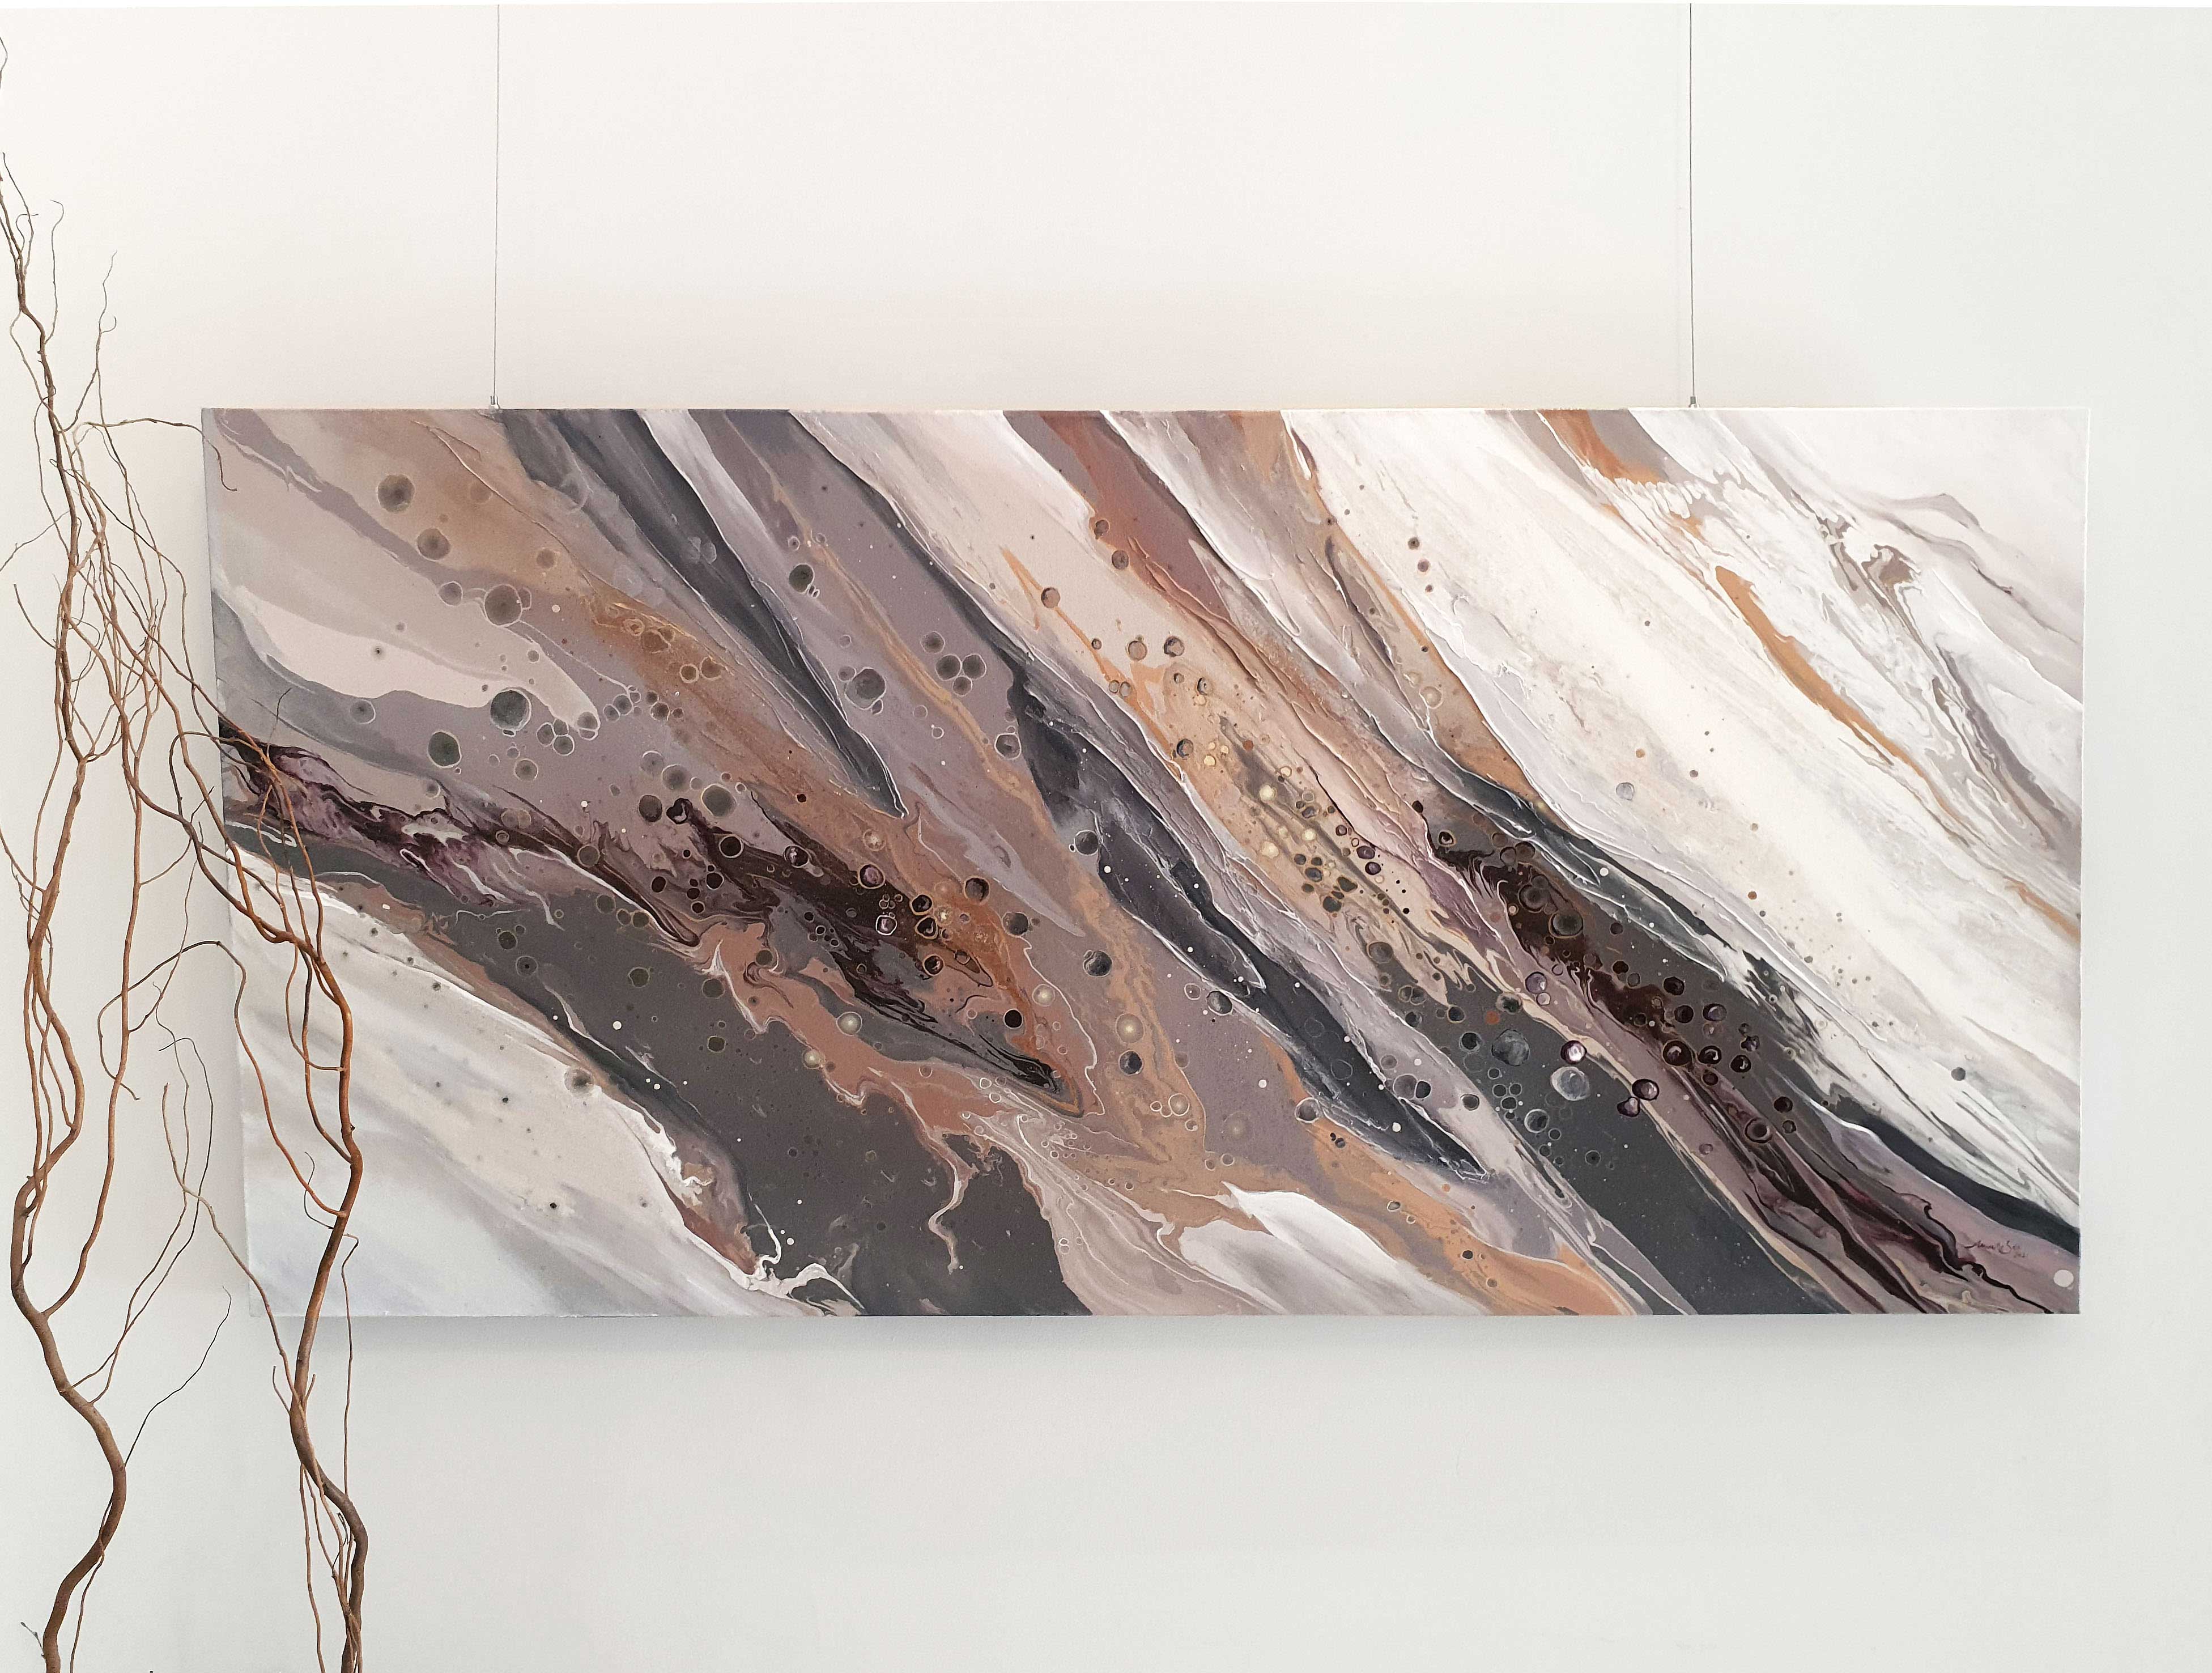 discovery - 75x150cm